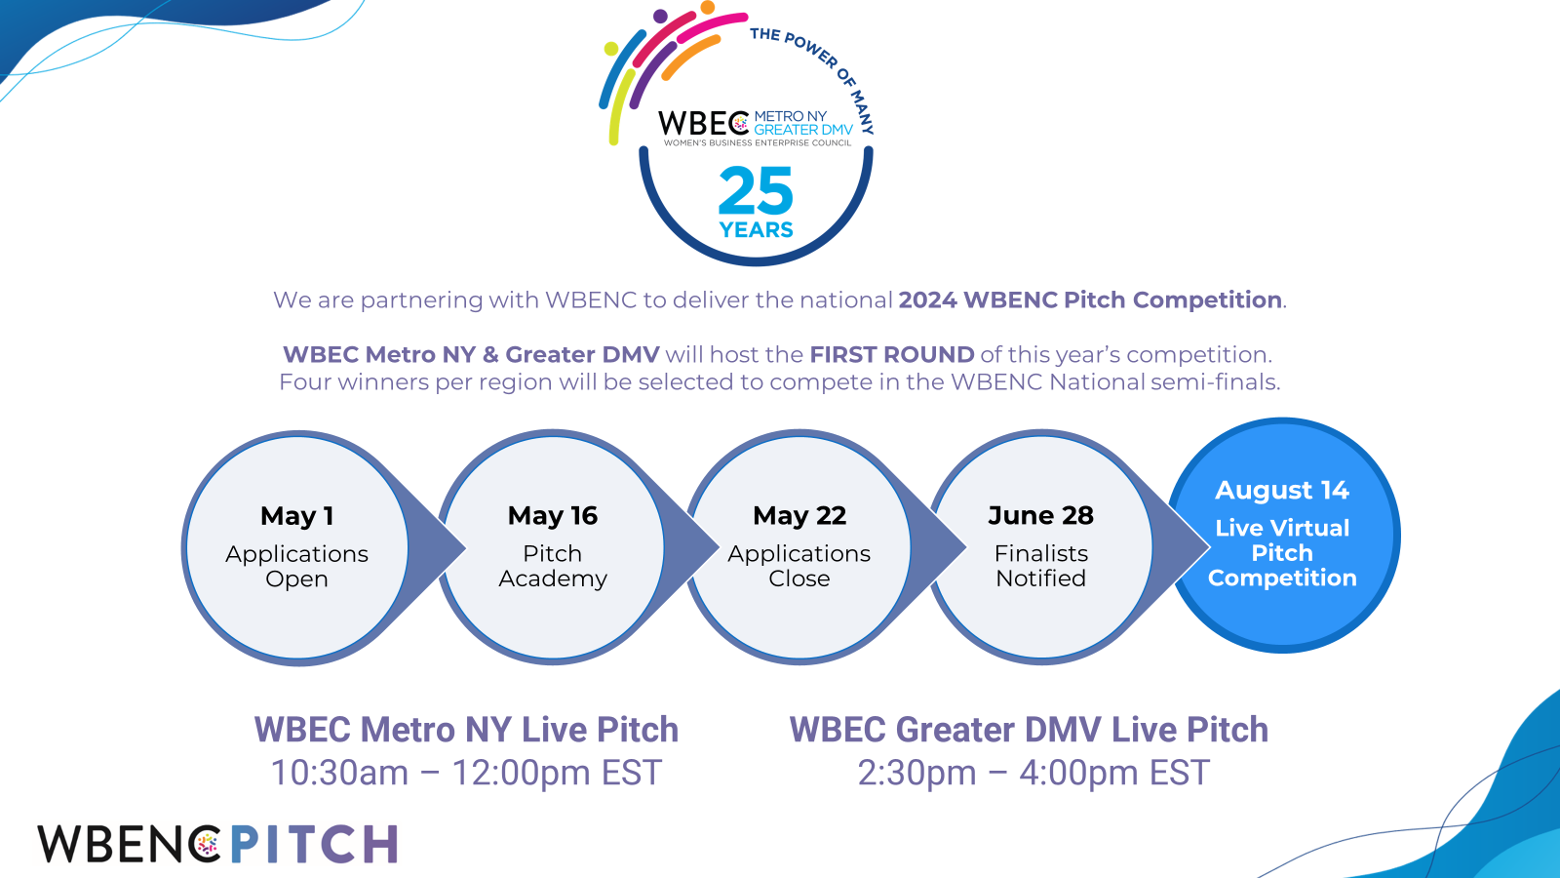 2024 WBENC National Pitch Competition timeline. May 1: Applications Open; May 16: Pitch Academy; May 22: Applications Close; June 28: Finalists Notified; August 14: Live Virtual Pitch Competition. WBEC Metro NY Live Pitch: 10:30am - 12pm EST; WBEC Greater DMV Live Pitch: 2:30pm - 4pm EST